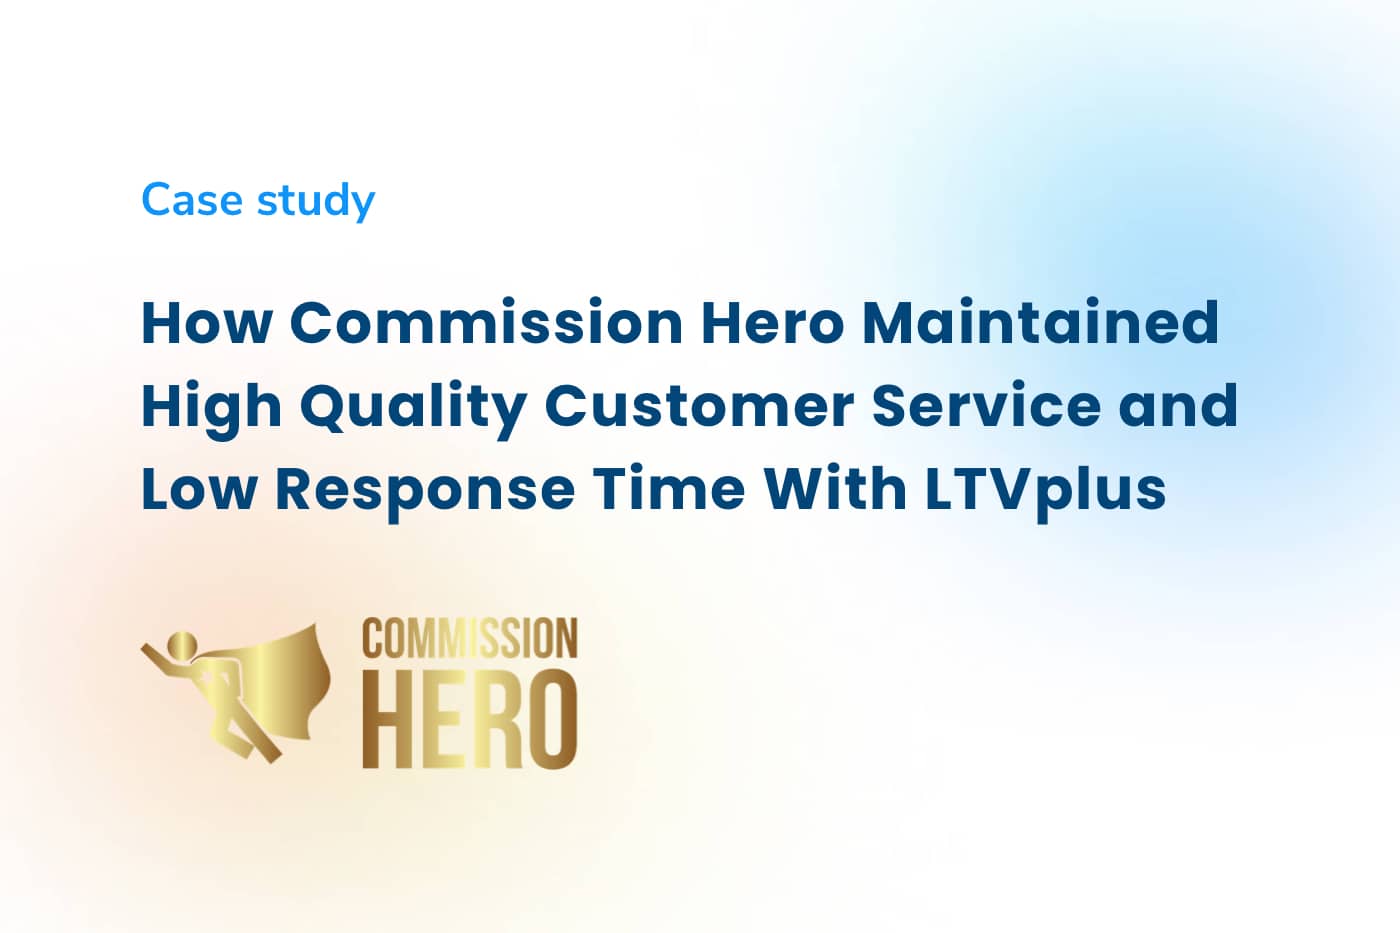 Commission Hero featured